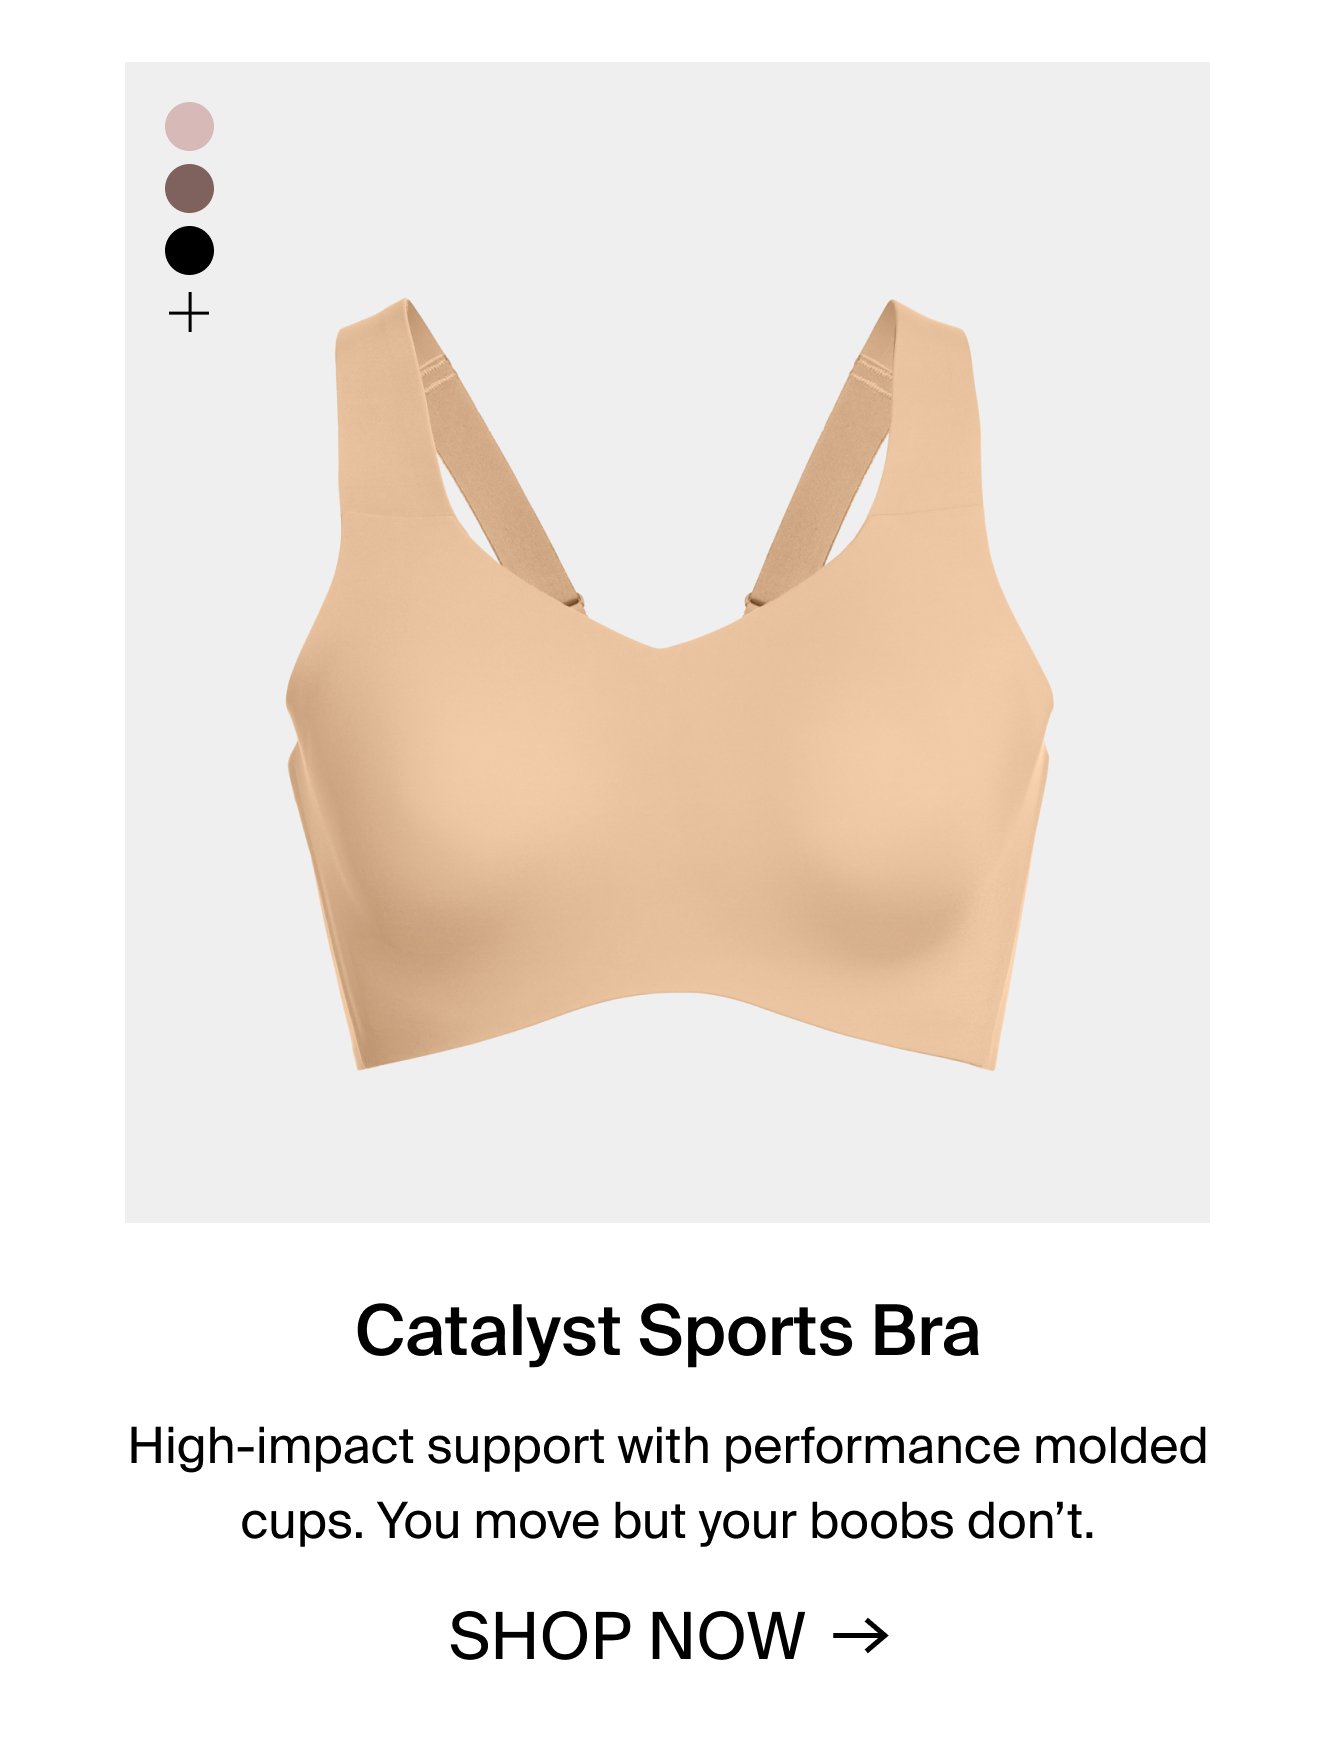 Catalyst Sports Bra. High-impact support with performance molded cups. You move but your boobs don't. SHOP NOW.